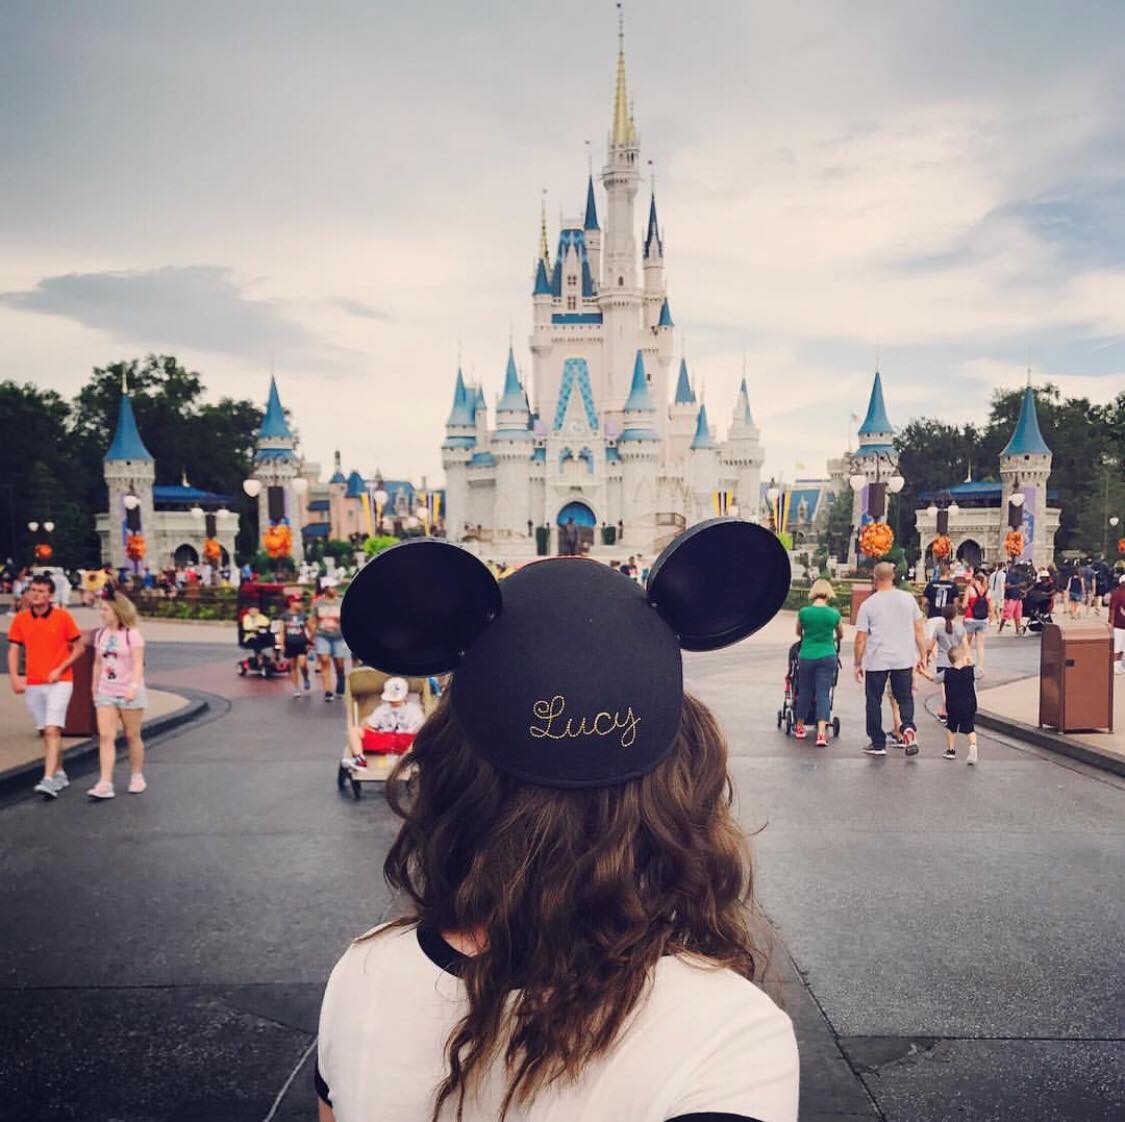 A girl with Mickey hat with Lucy written on it standing in front of the grey Cinderella Castle at Disney World